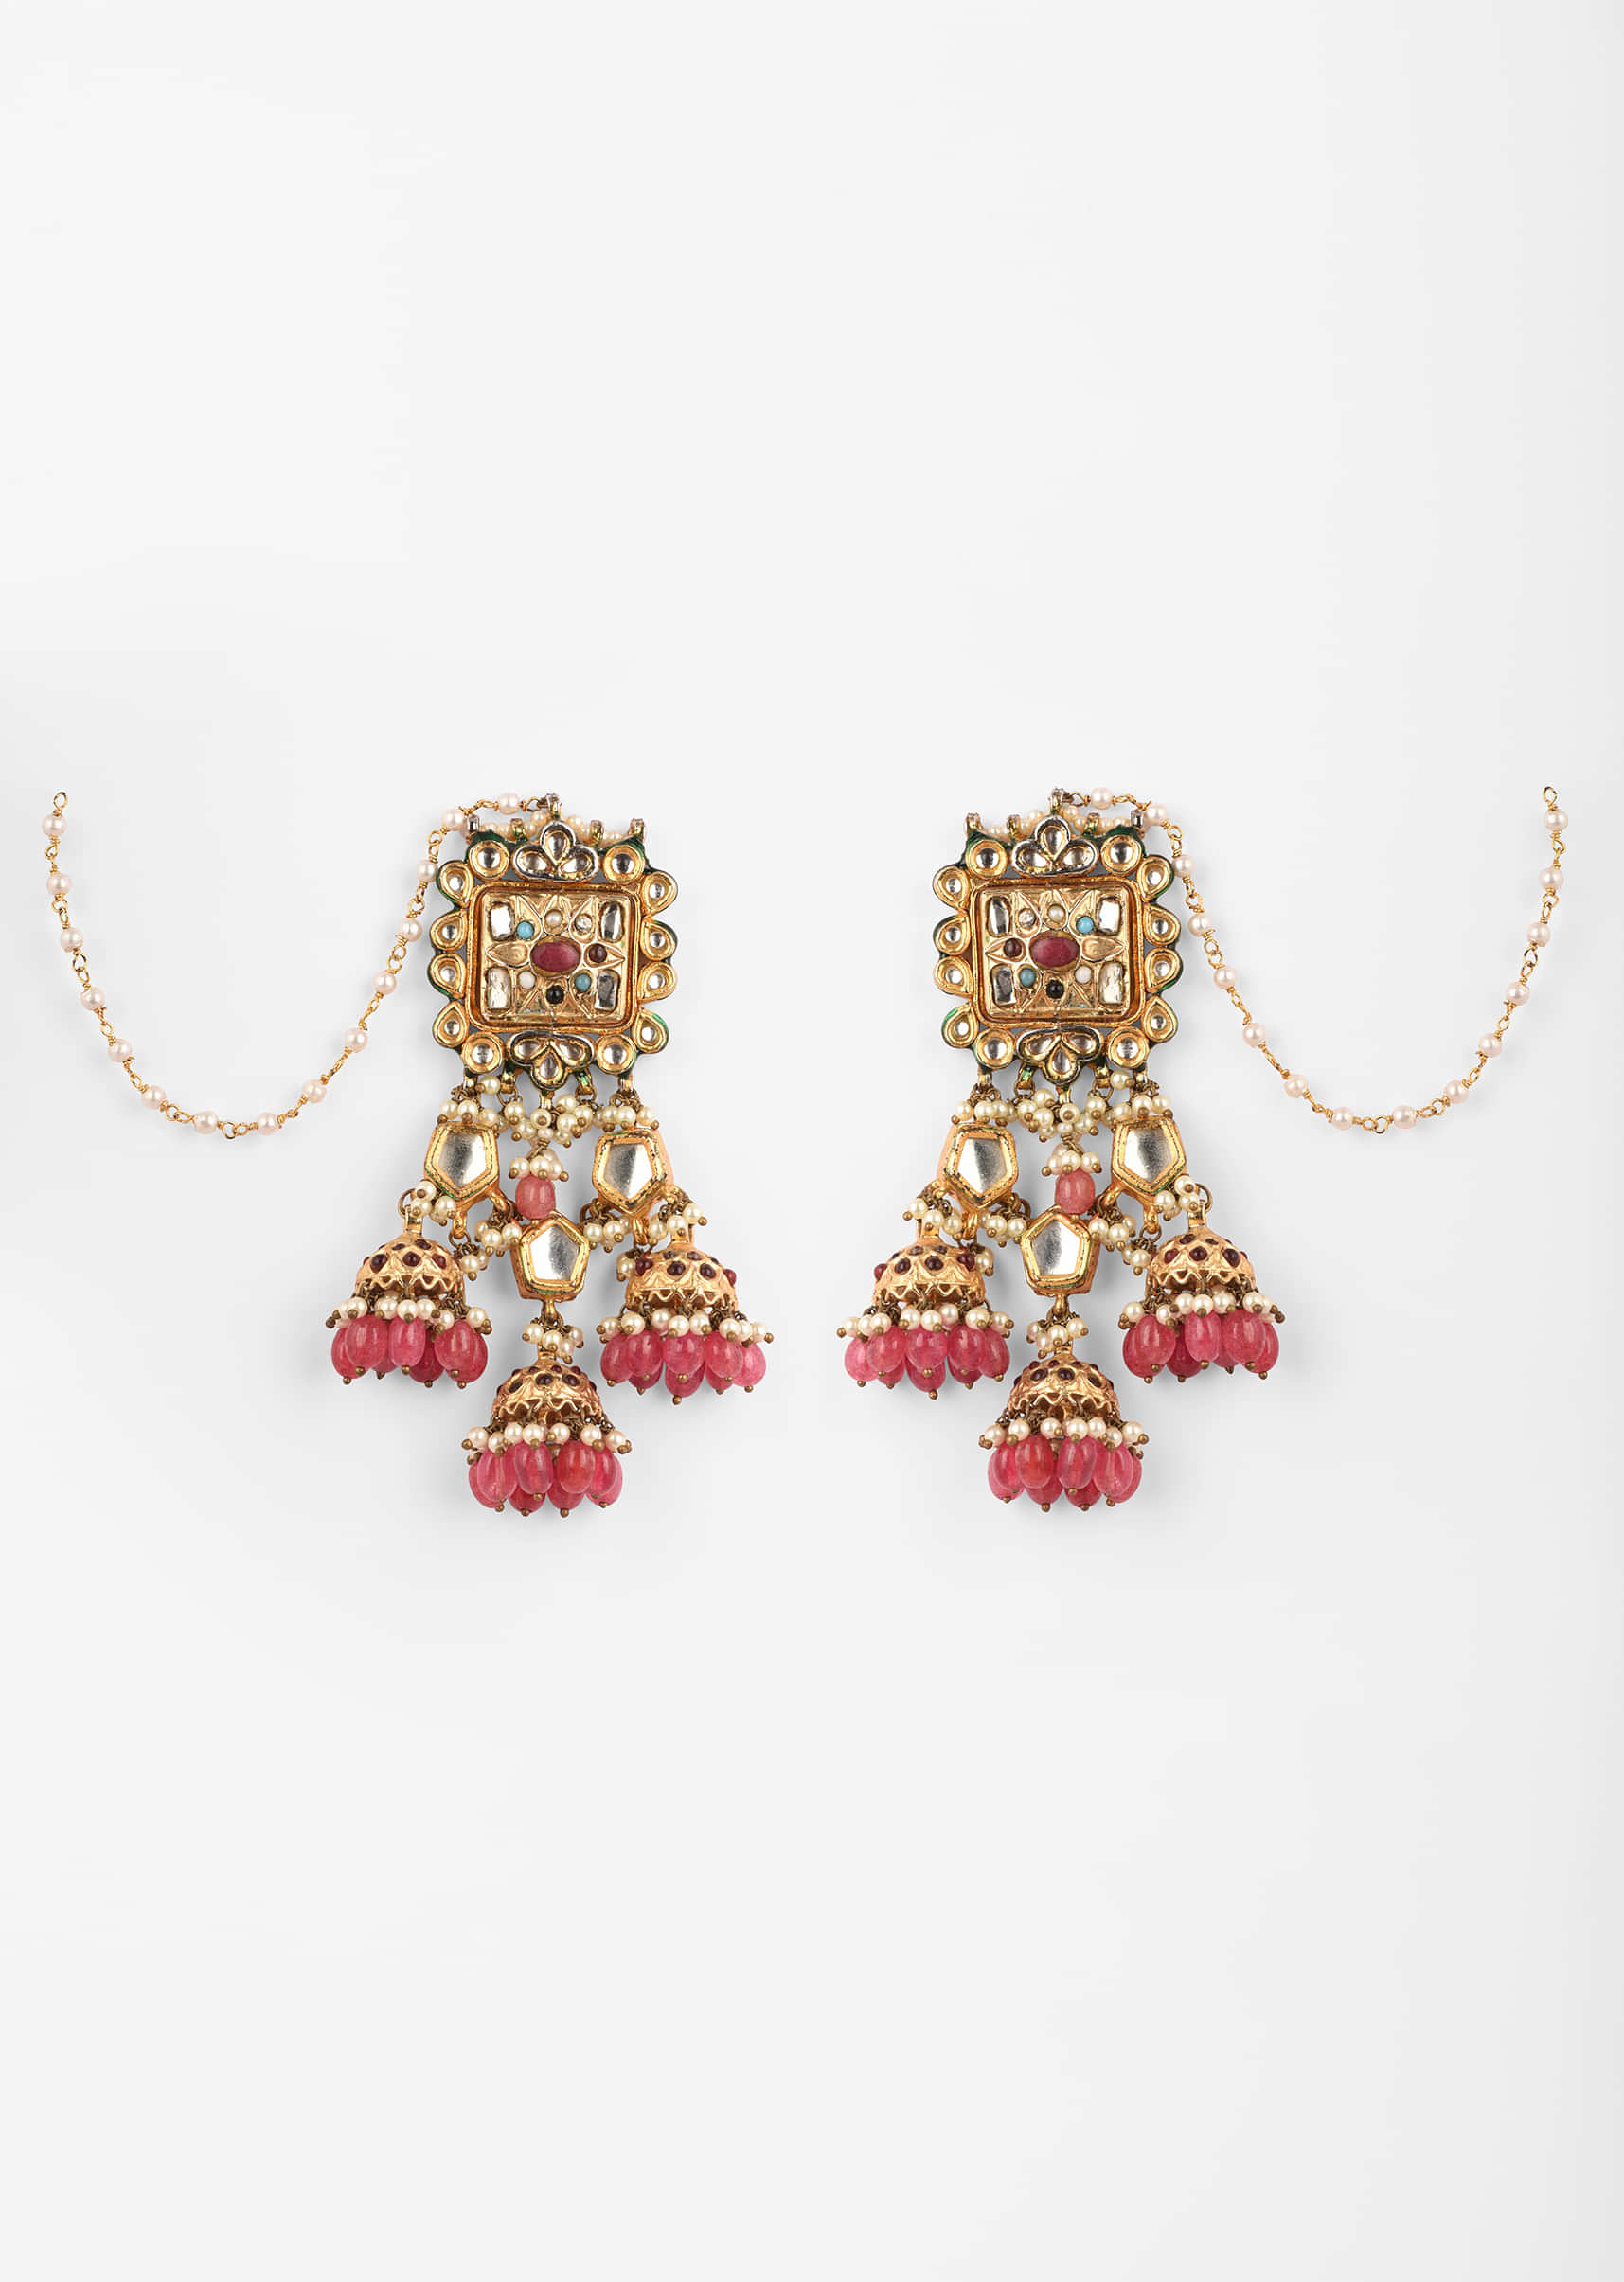 Gold Plated Earrings With Kundan Studded Square Motif And Dangling Jhumkas With Maroon Beads